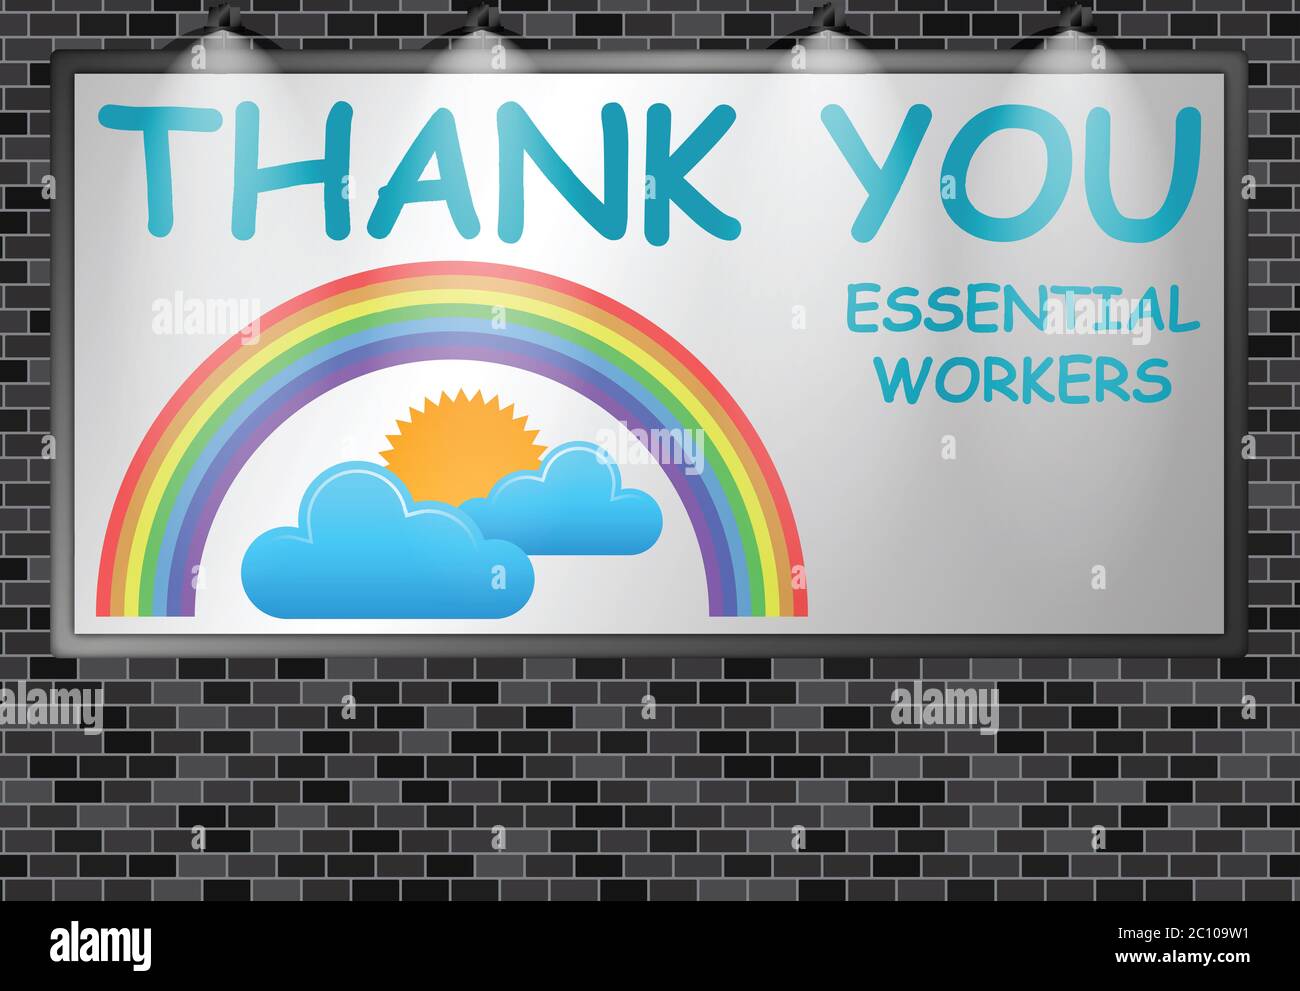 Illuminated advertising billboard with thank you essential workers who continued working through the pandemic mounted on external brick wall Stock Photo